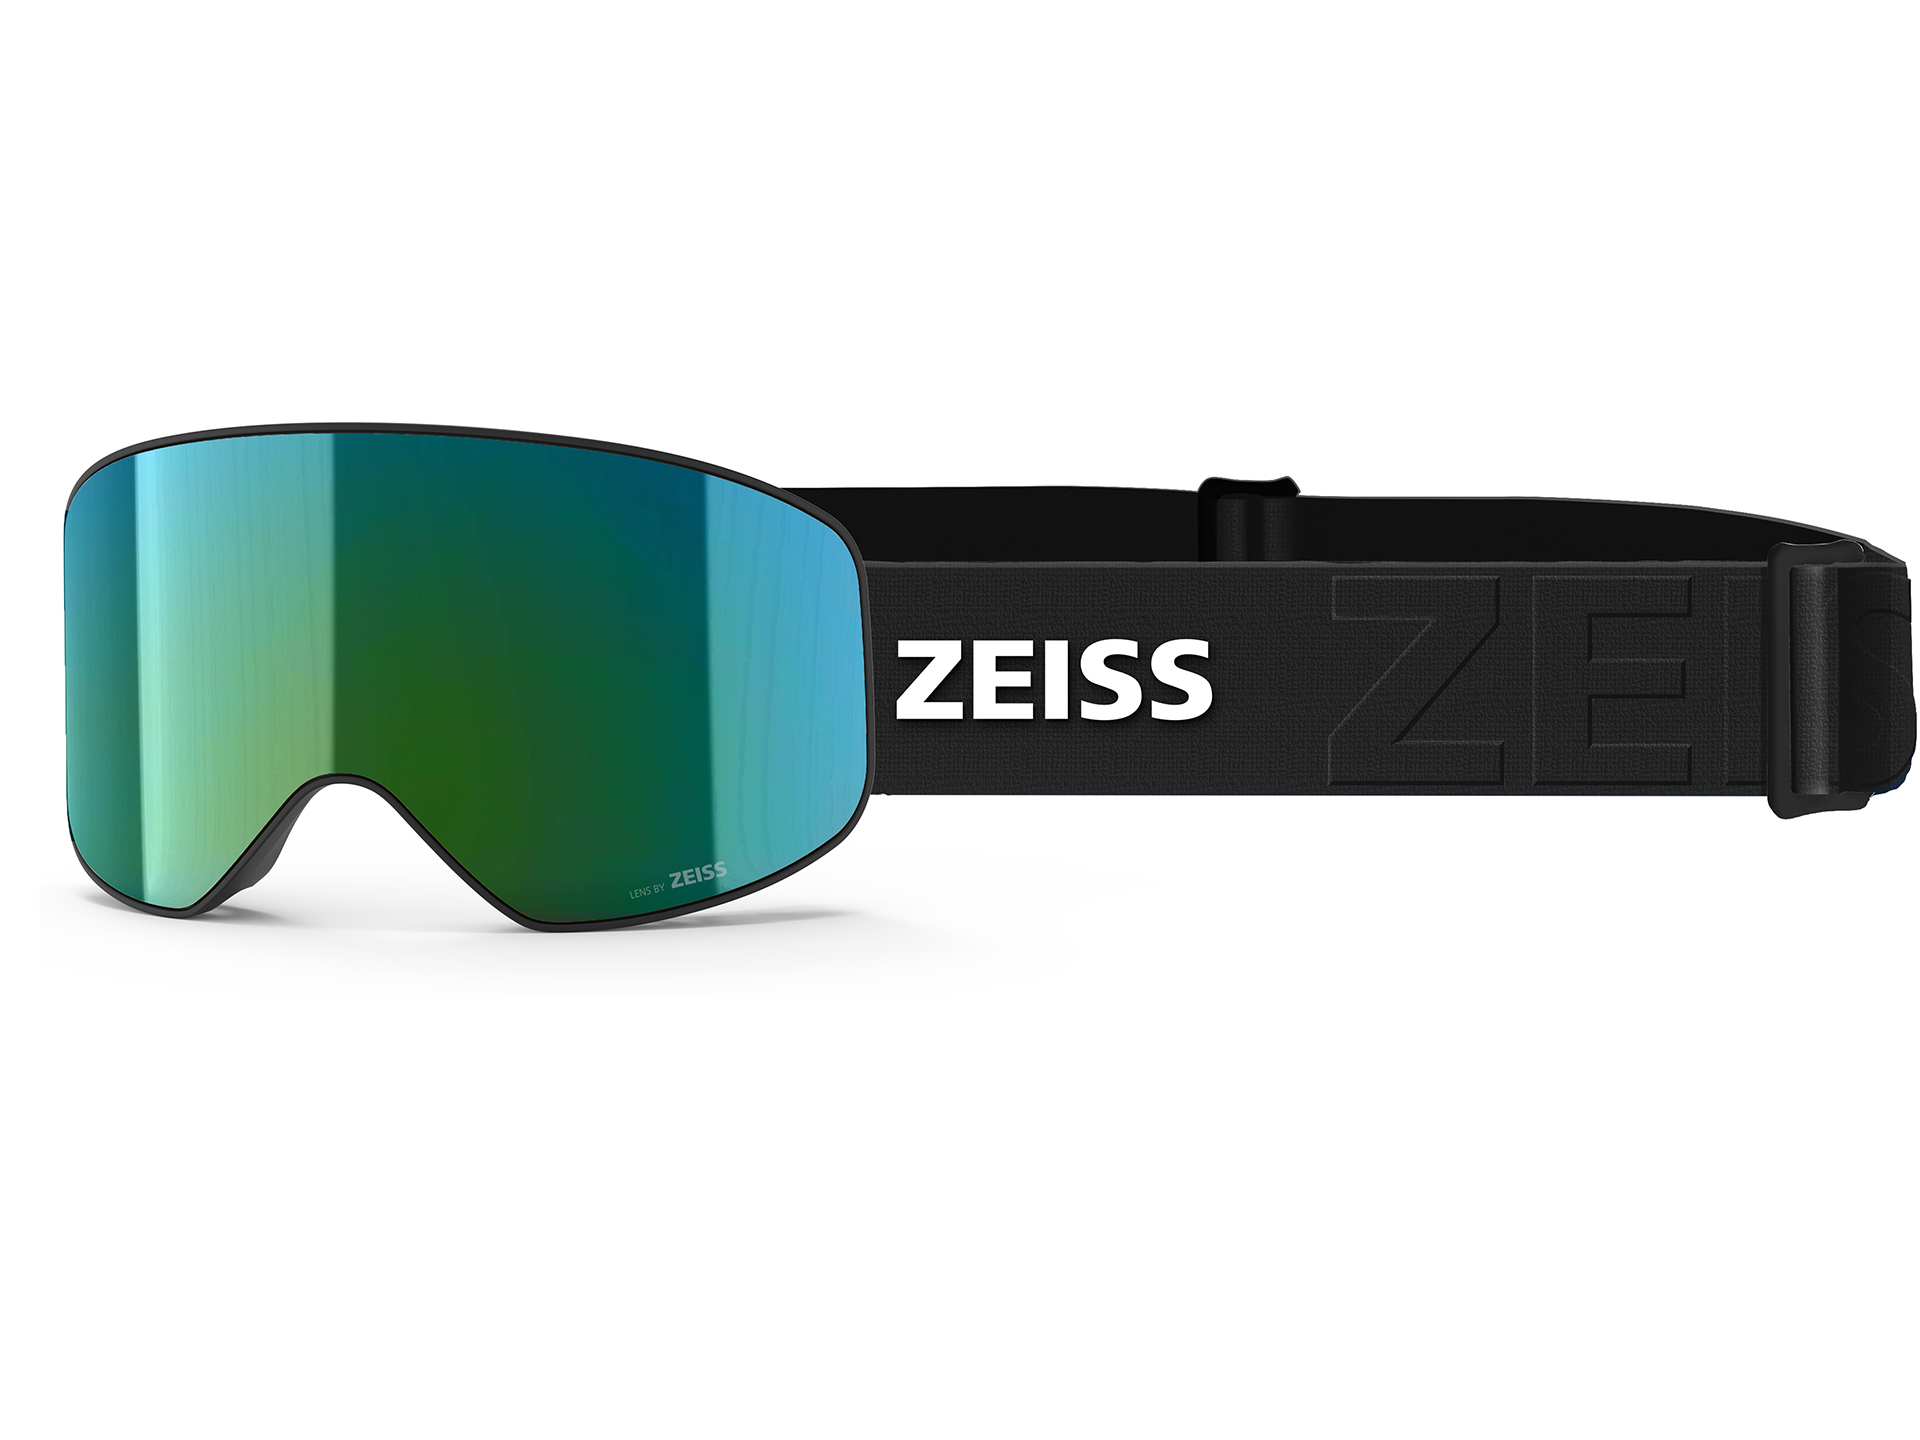 ZEISS snow goggles with turquoise visor and black strap